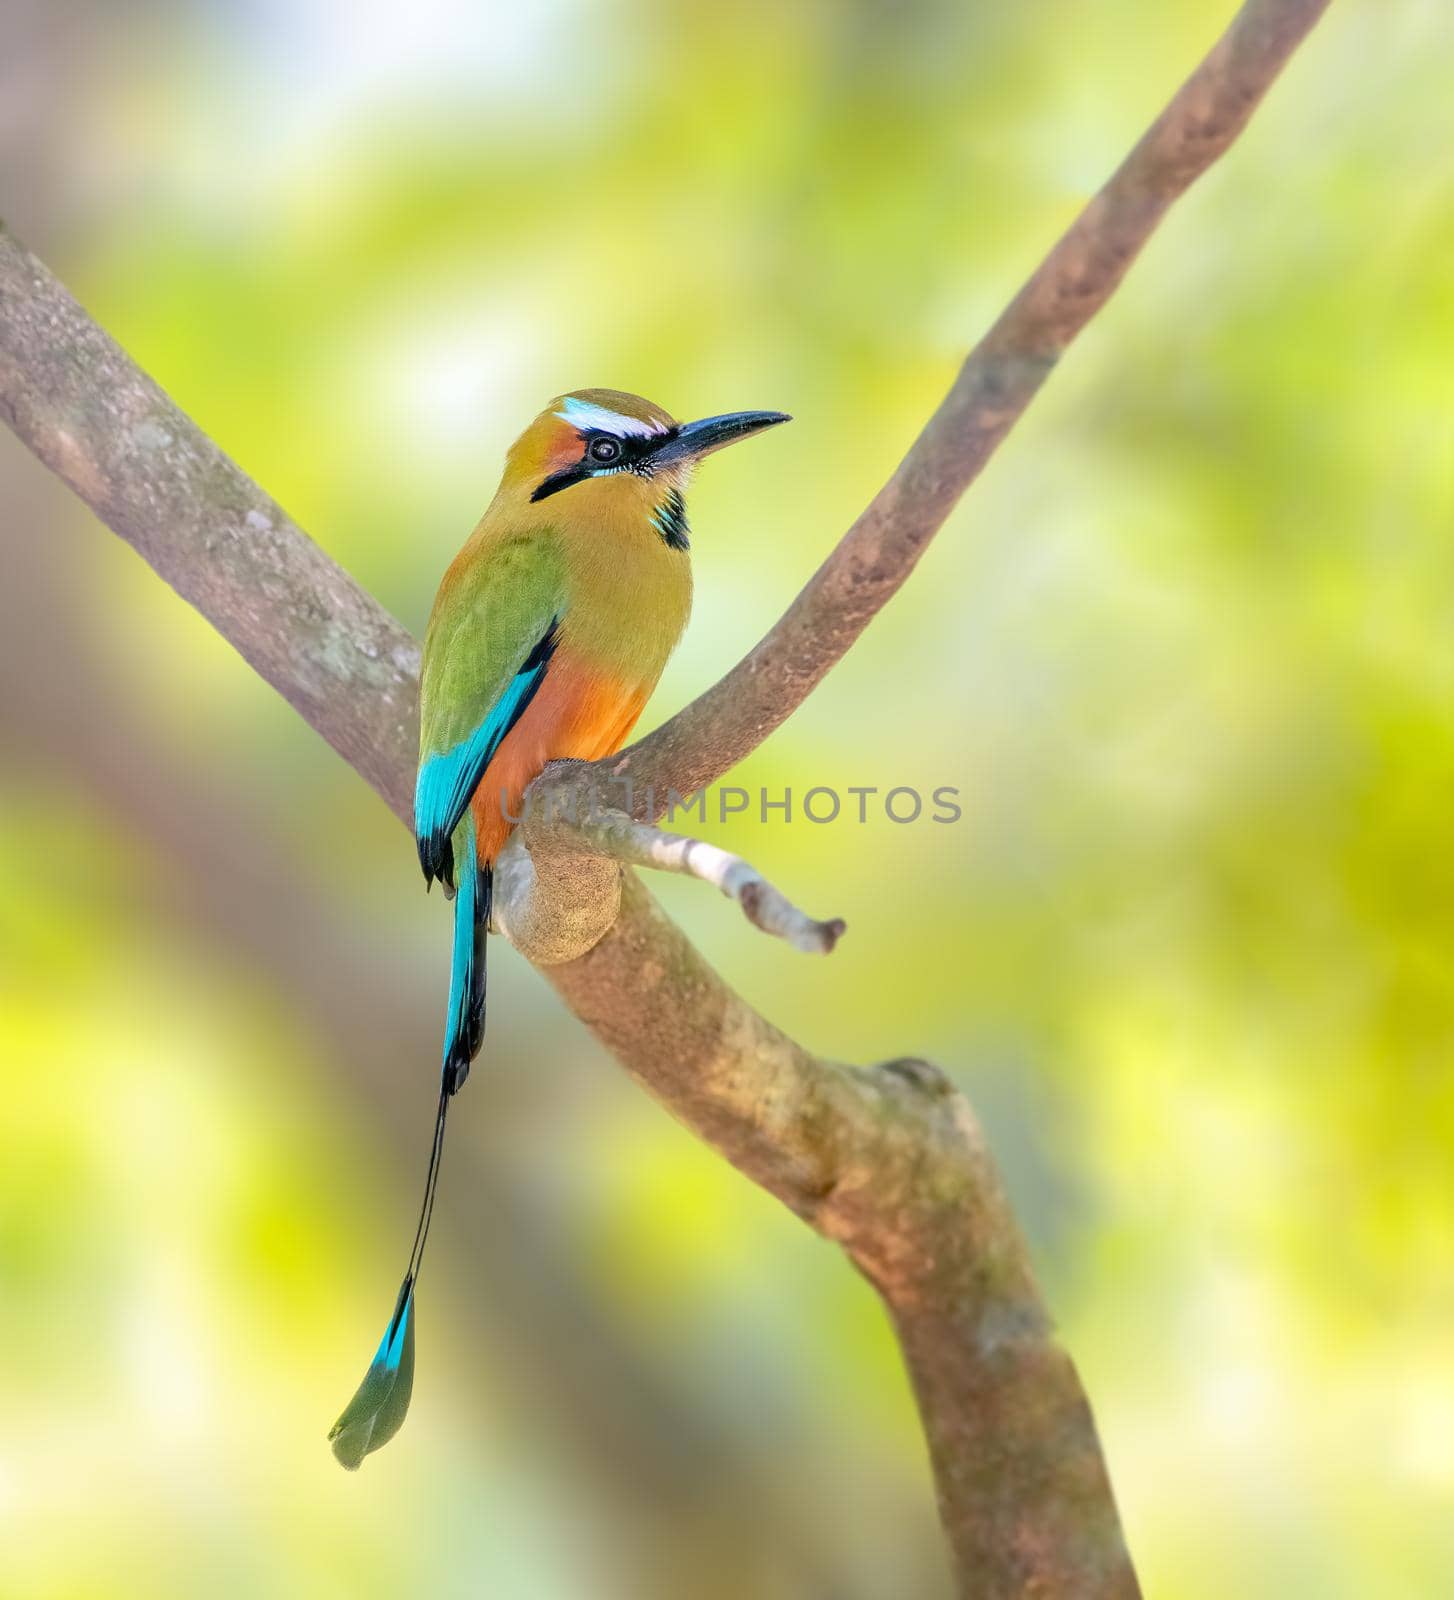 Turquoise browed motmot perched on a tree in El Salvador